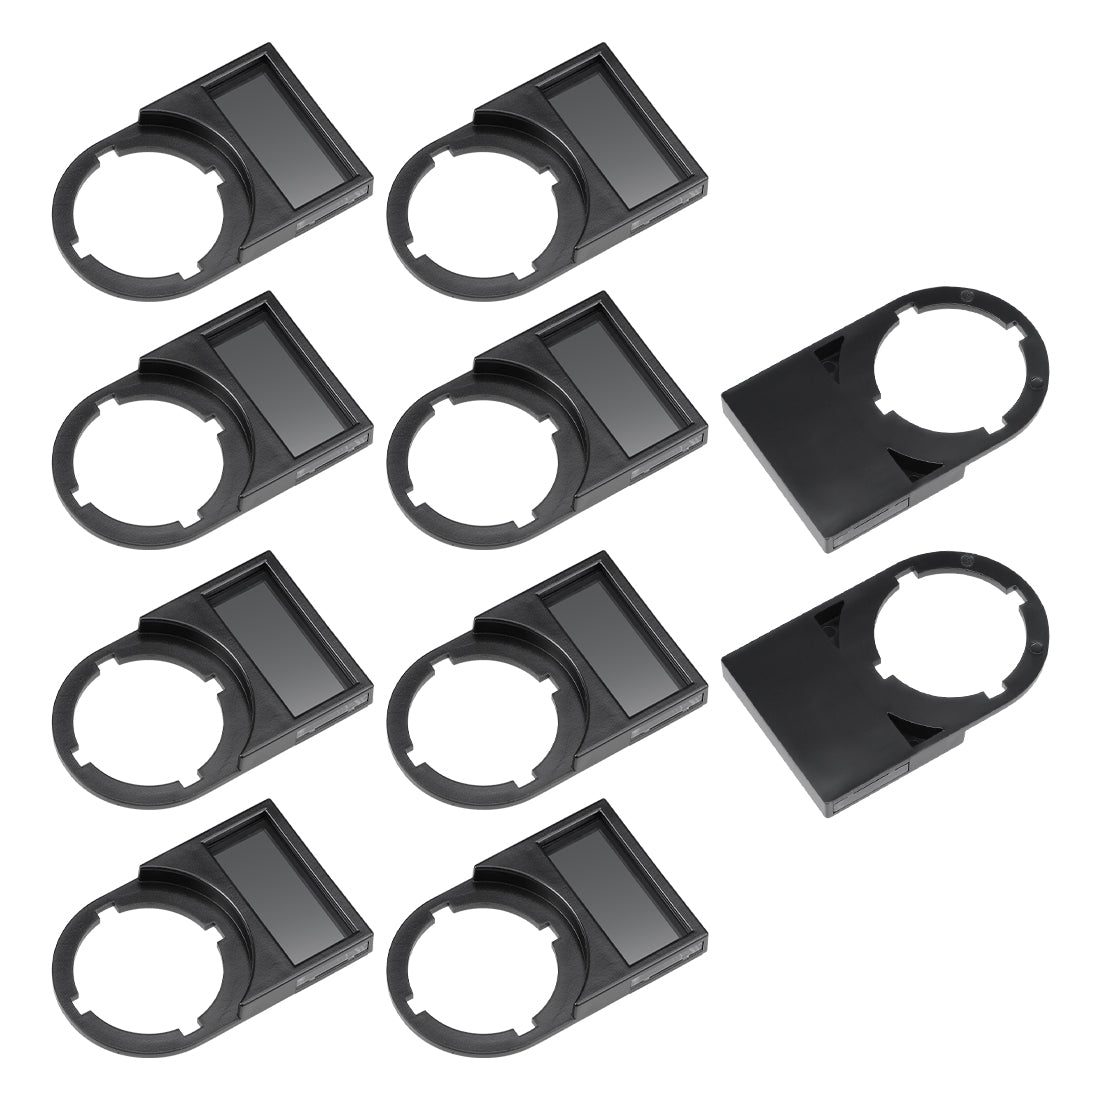 Uxcell Uxcell 10pcs 22mm Diameter Black Plastic Push Button Switch Notice Board Dust-Proof 25x11mm Lens